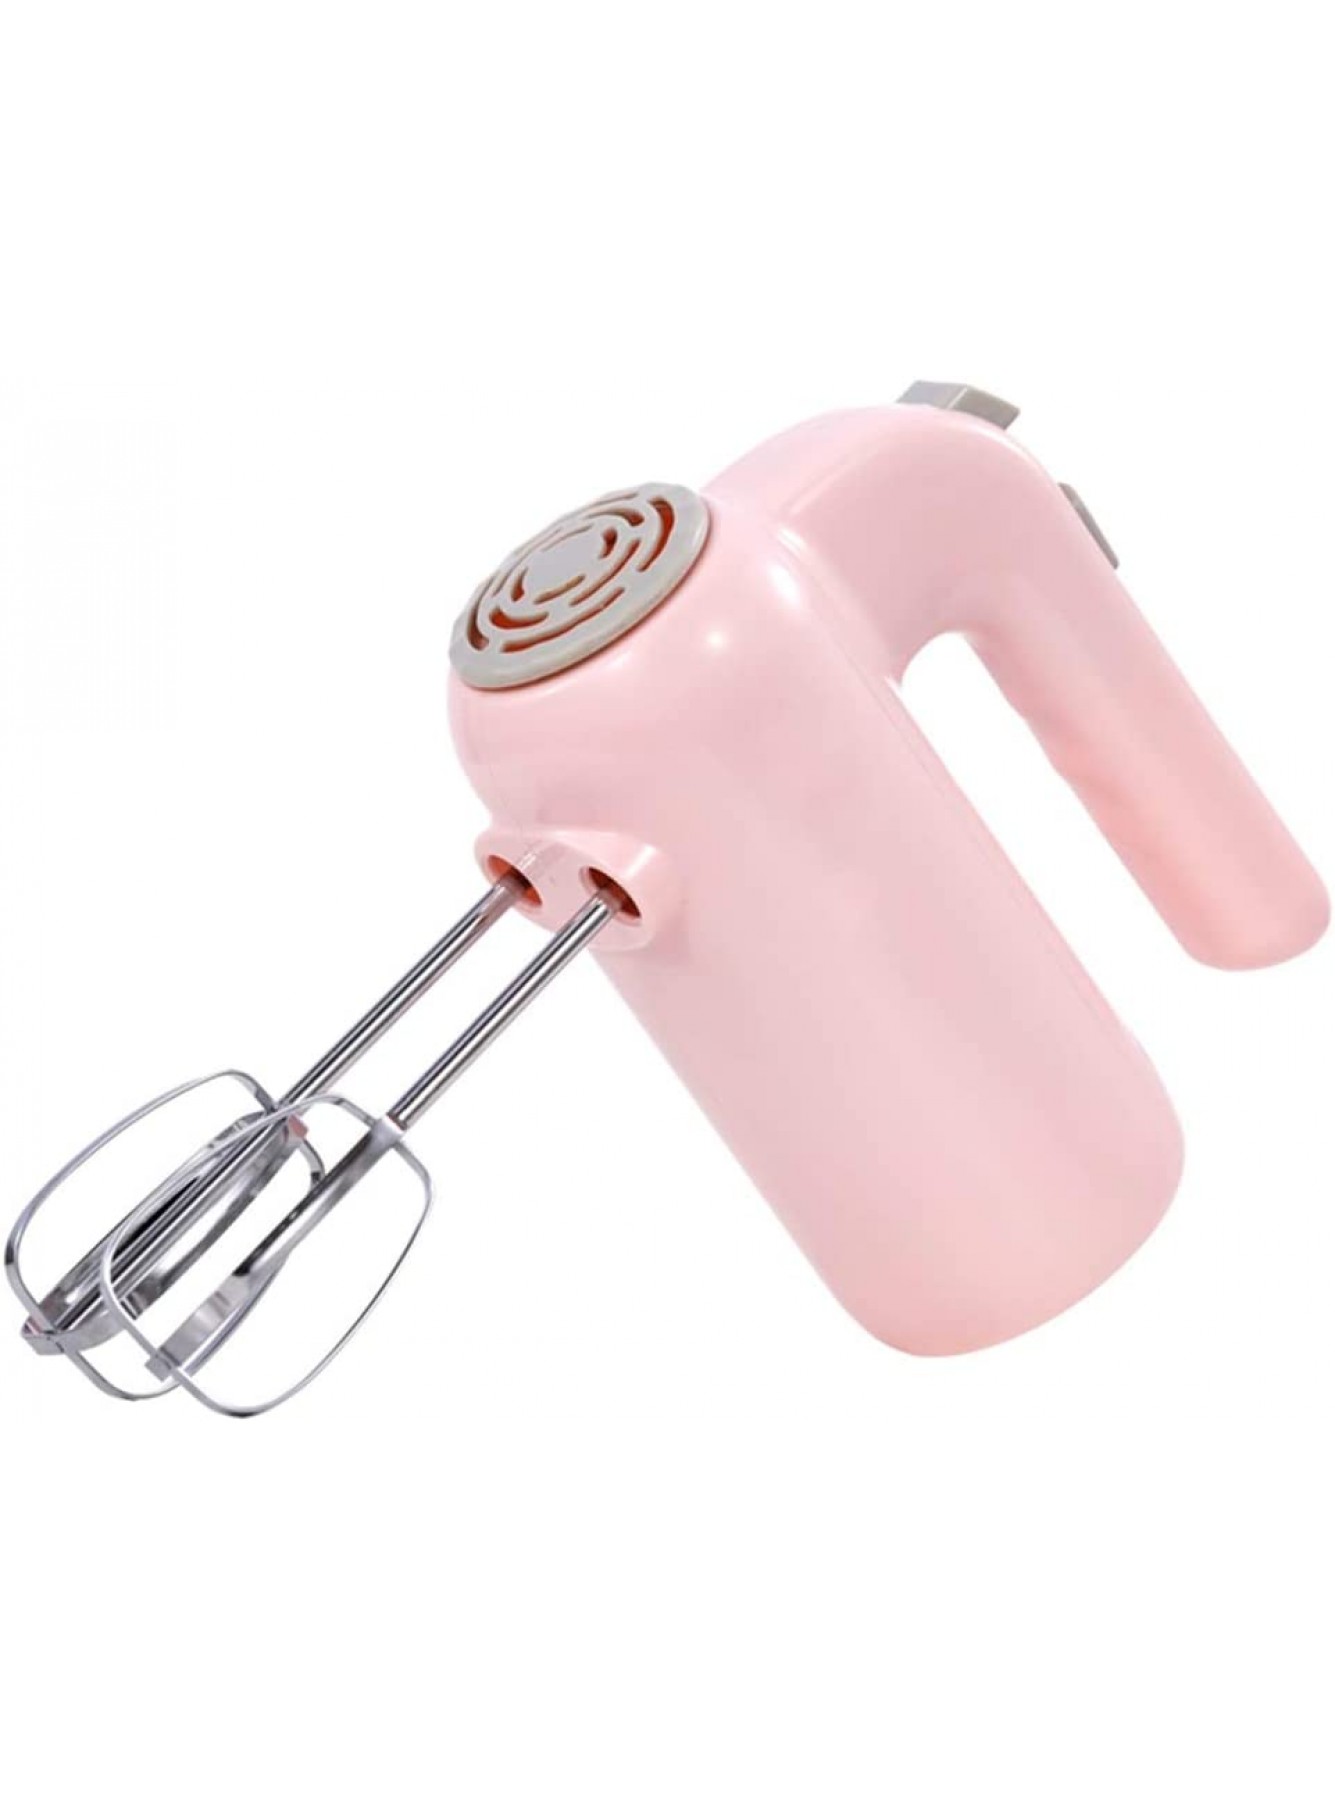 LJFJJ Compact Hand Mixer Electric 5-speed Kitchen Electric Mixer High Power Cream Egg Whisk Blender Cake Dough Bread Maker Machine Includes Beaters Dough Hooks Color : Pink B08D6KSX13